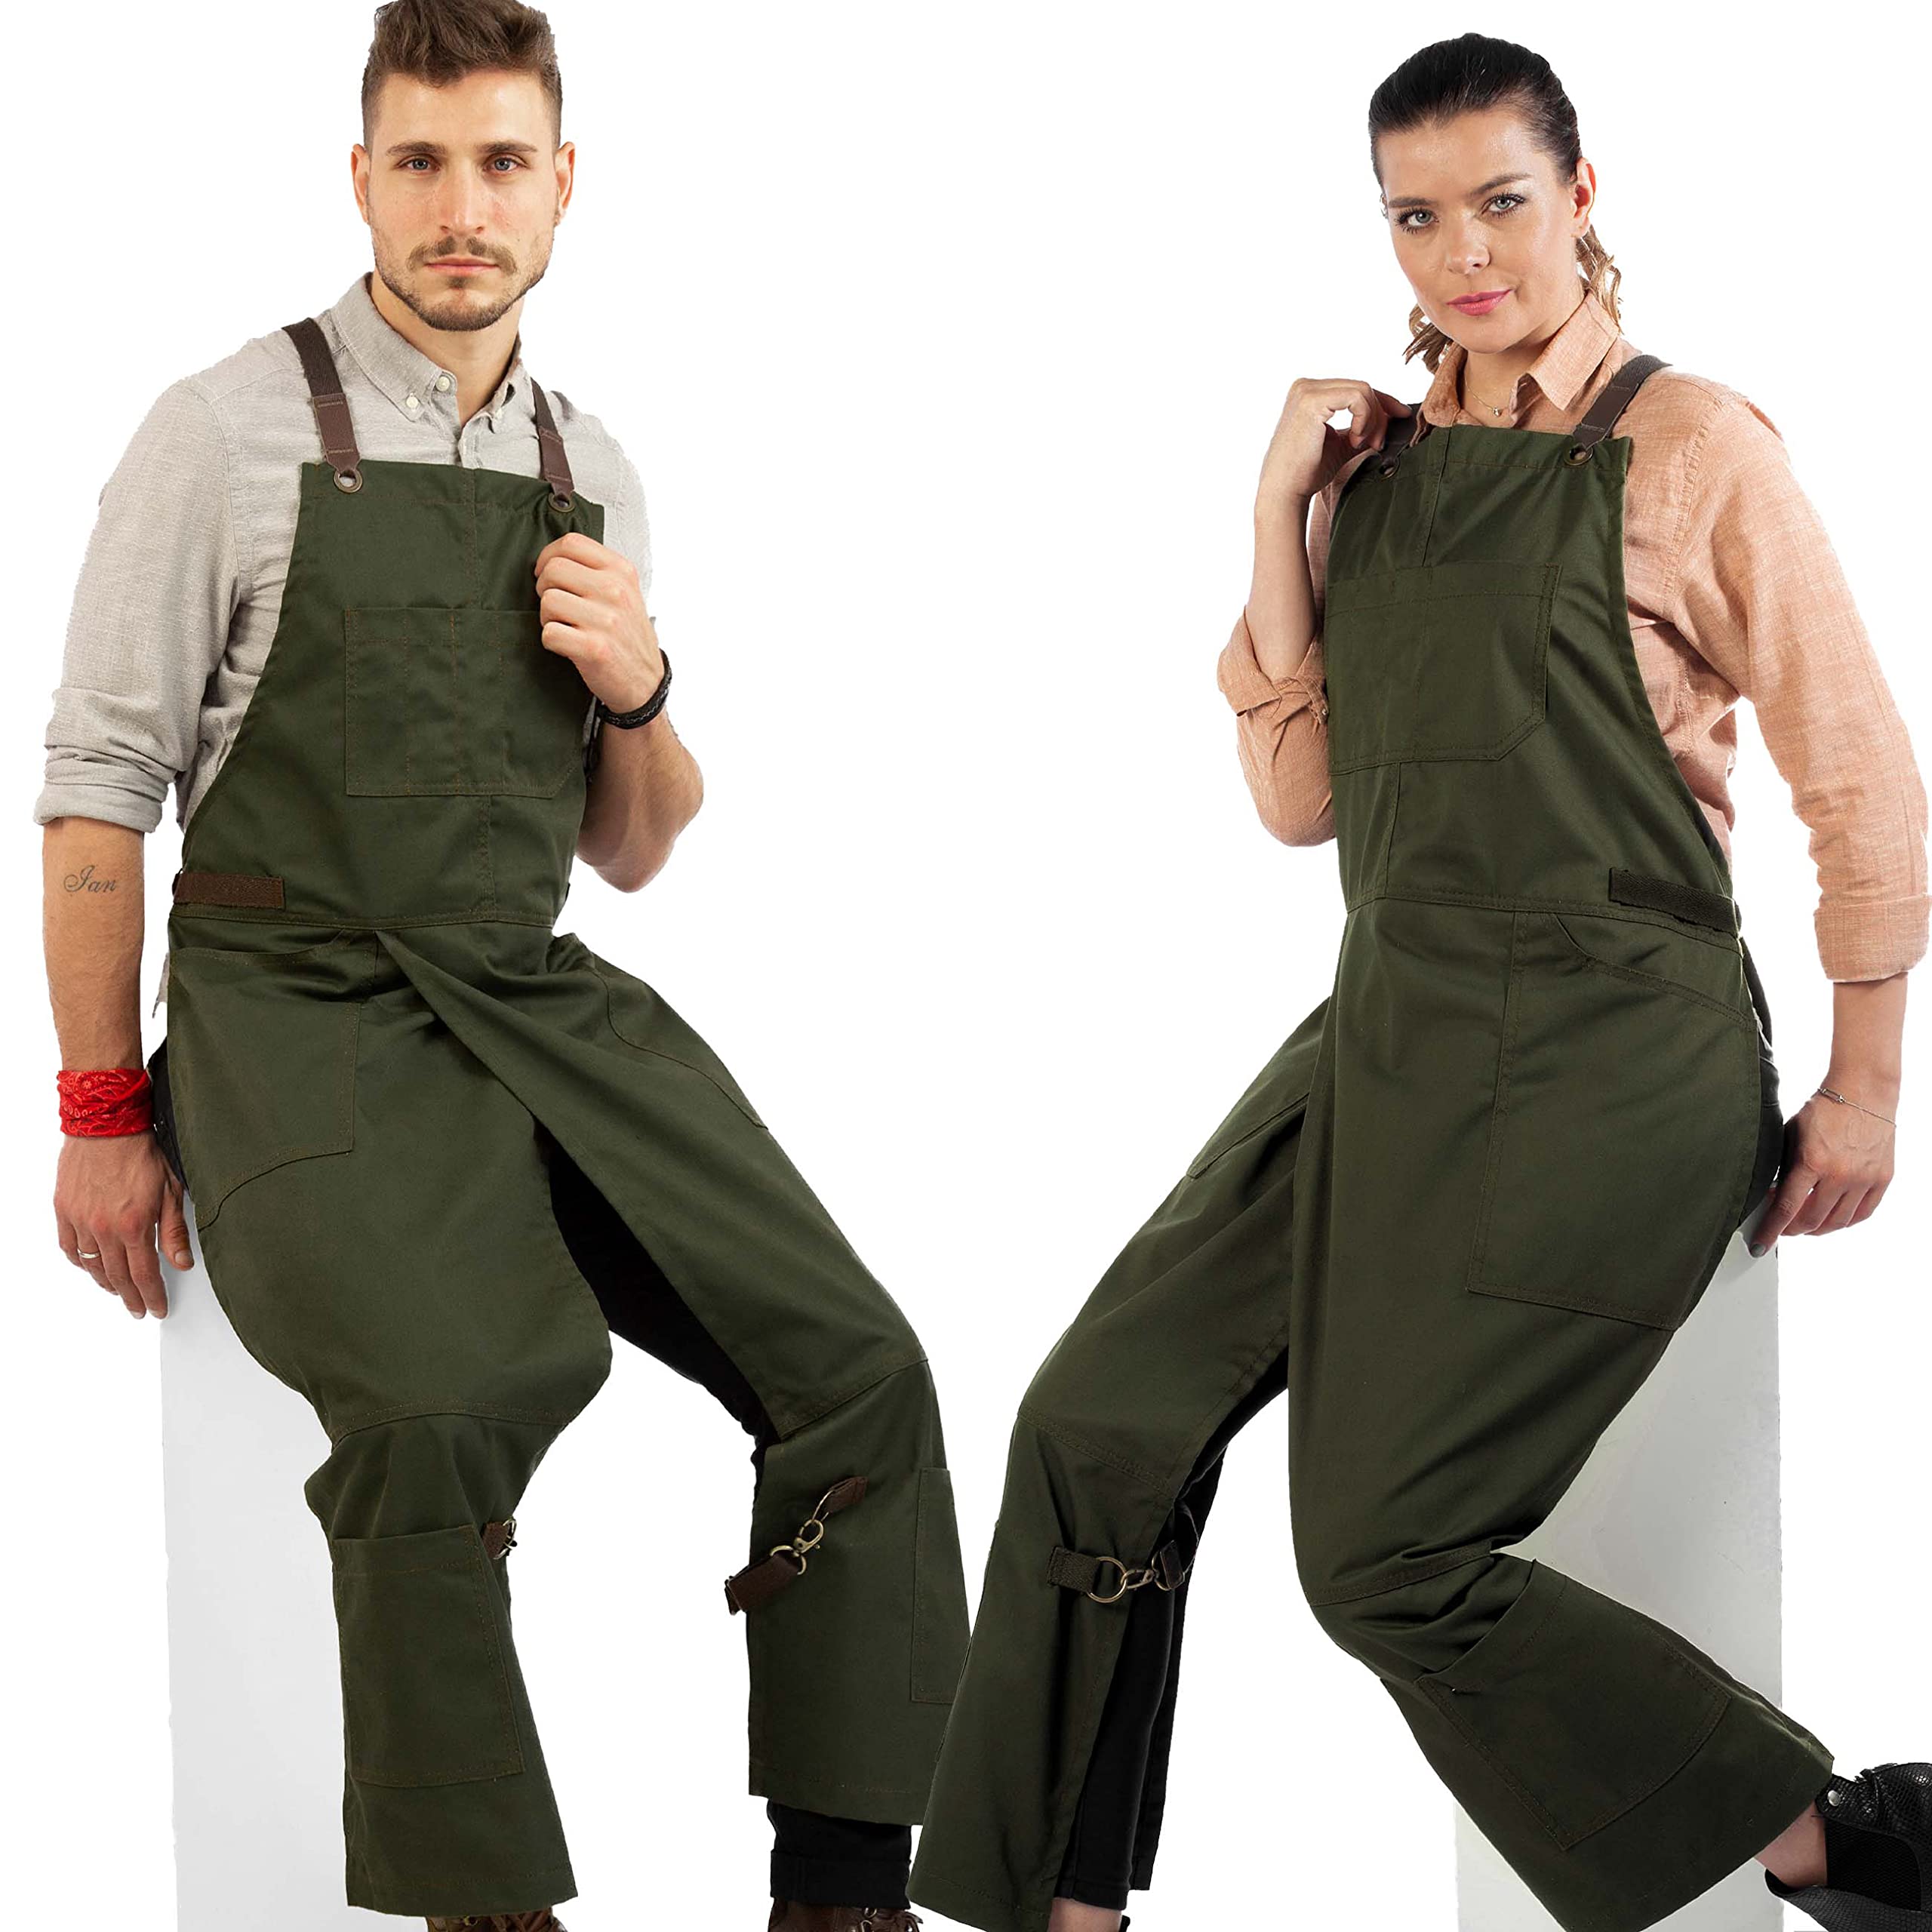 Under NY Sky Pottery Moss Green Apron – Full Coverage Cross-Back, Durable Twill, Leather Reinforcement and Overlapping Split-Leg, Adjustable for Men and Women – Pottery Artist, Mechanic, Tattoo Apron